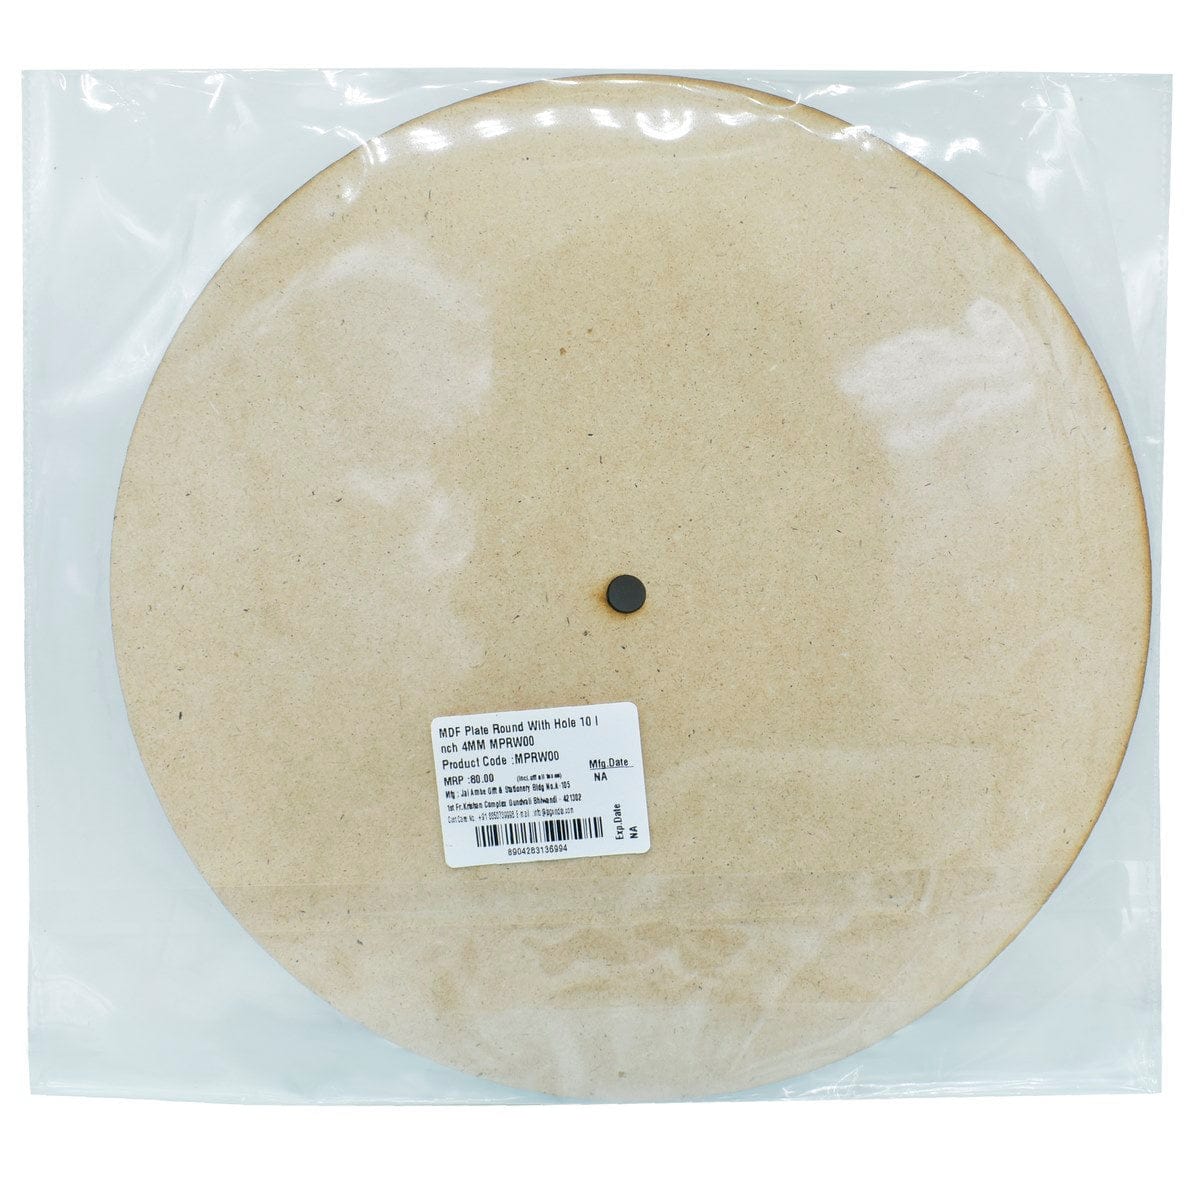 jags-mumbai MDF MDF Plate Round with hole 10 Inch 4mm MPRW00